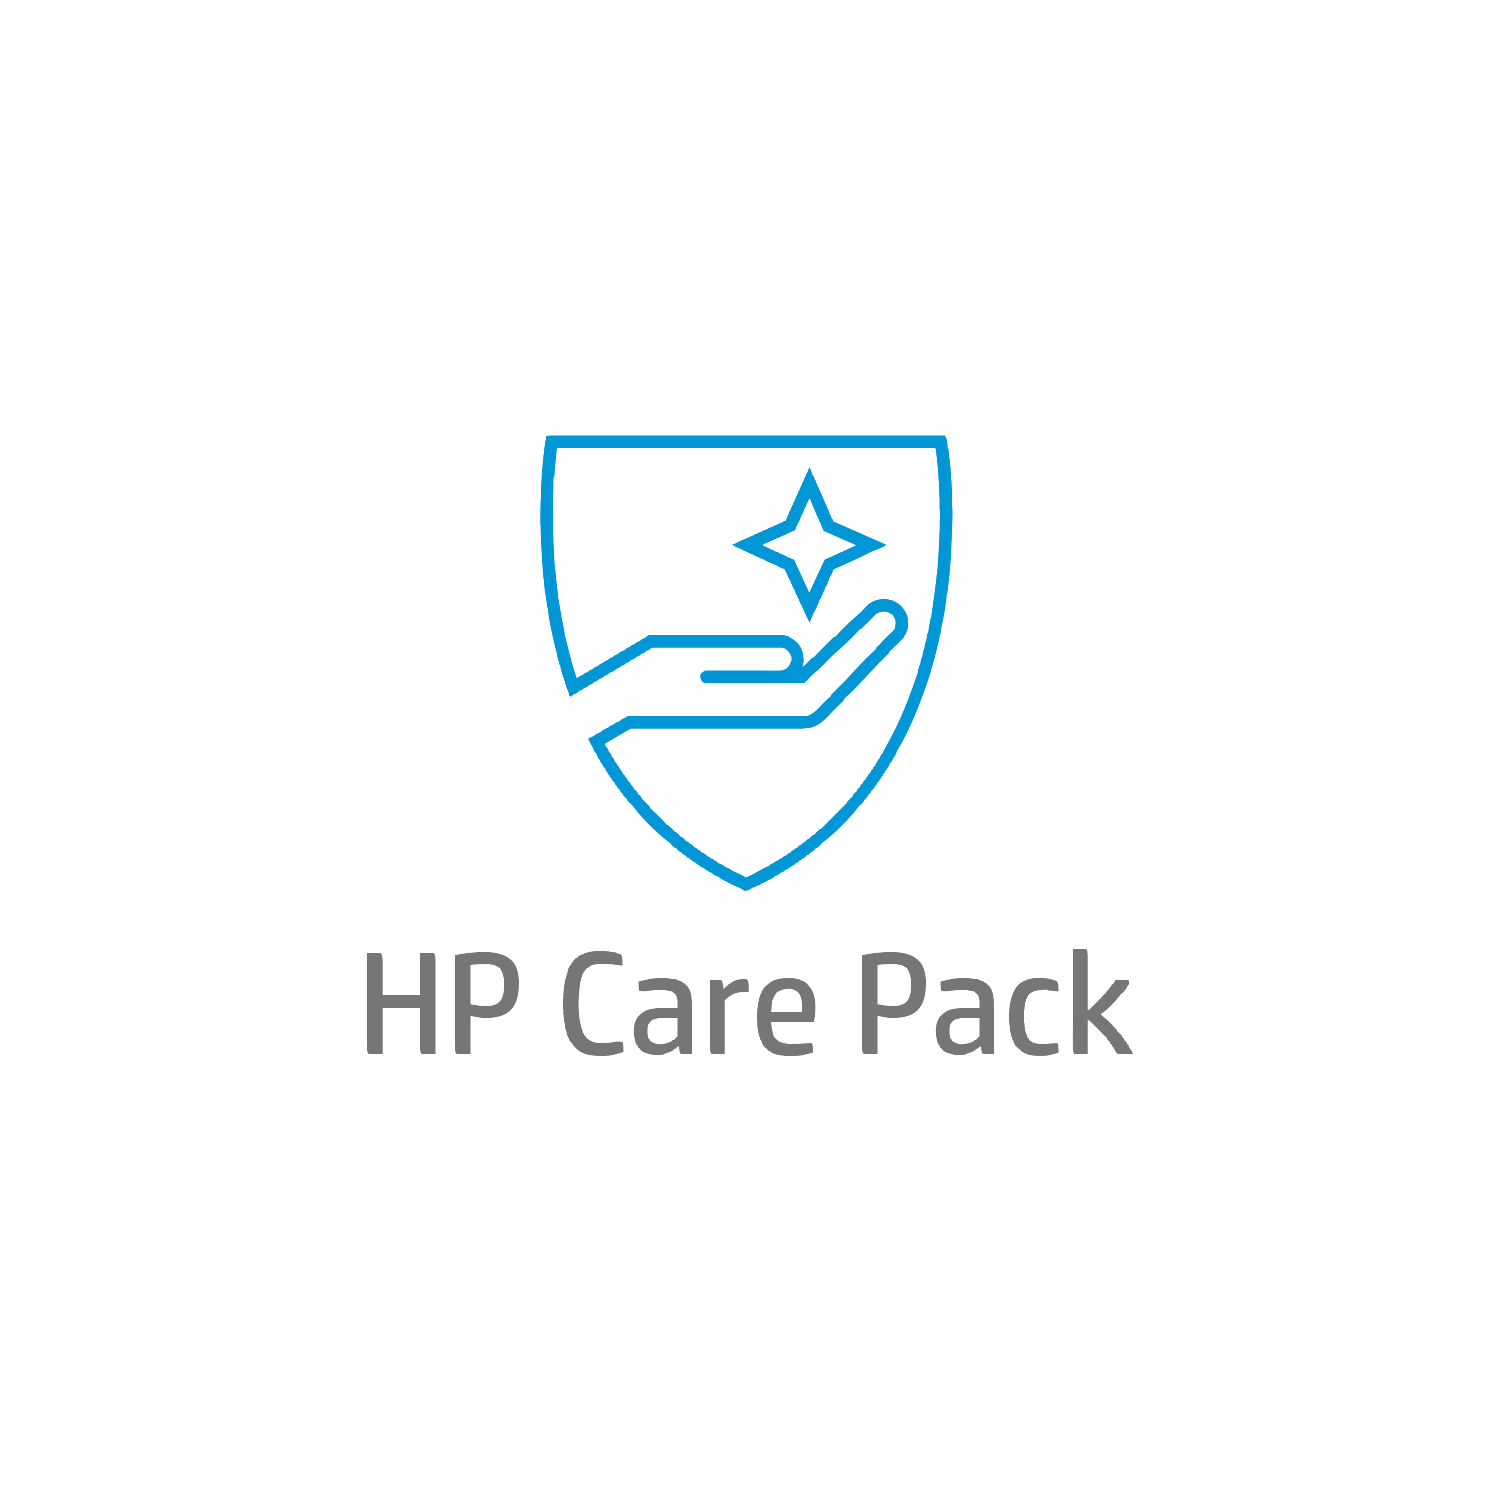 Bild von HP Electronic HP Care Pack Next Business - Systeme Service & Support